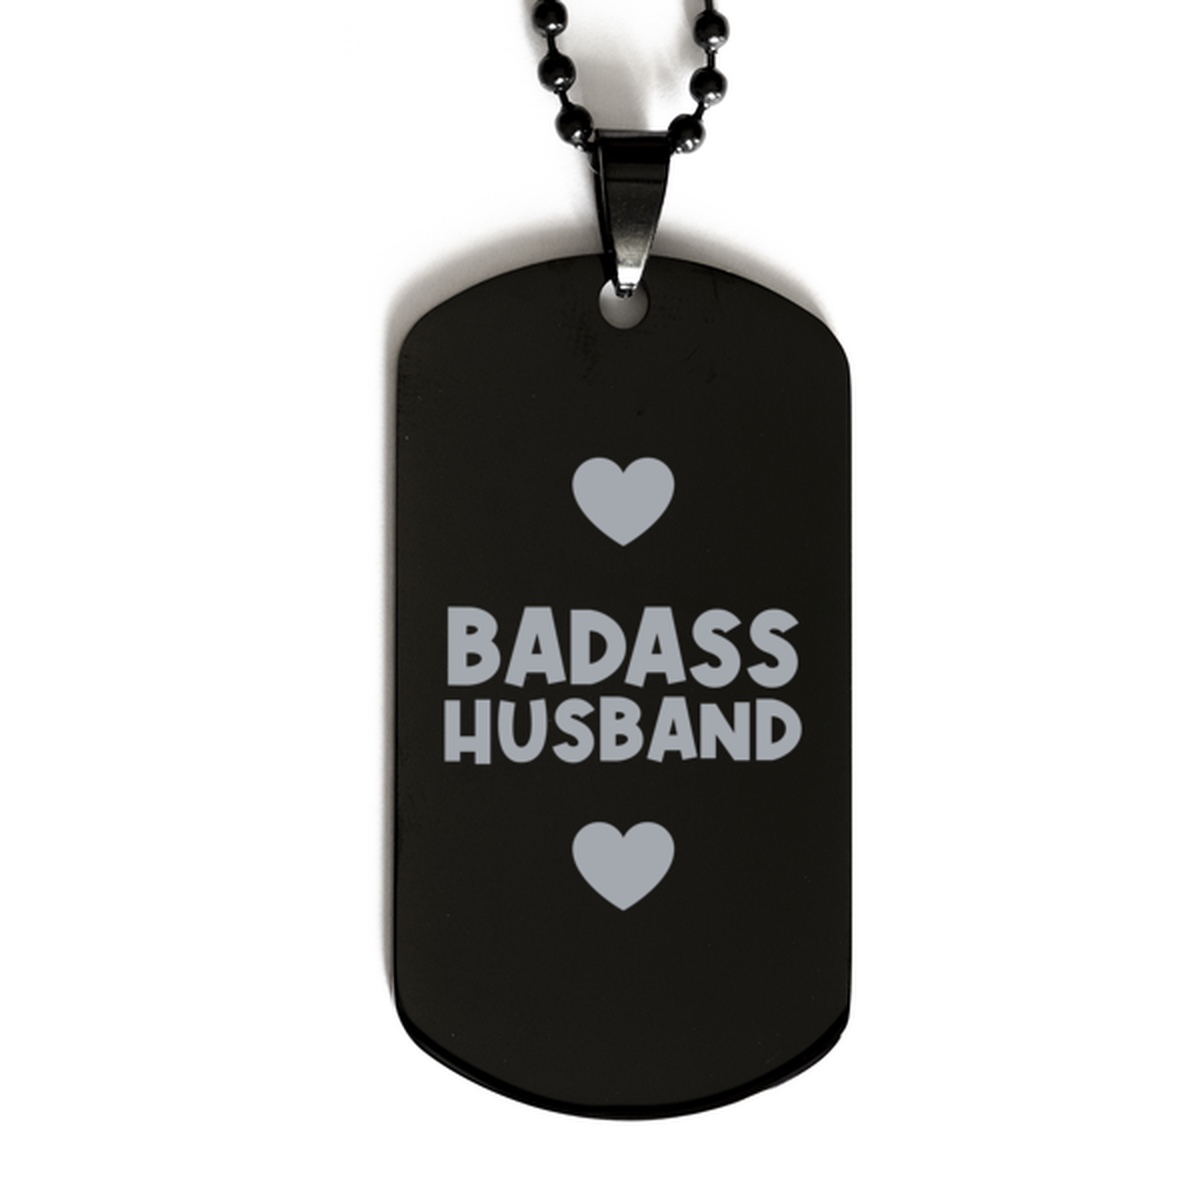 Husband Black Dog Tag, Badass Husband, Funny Family Gifts  Necklace For Husband From Wife